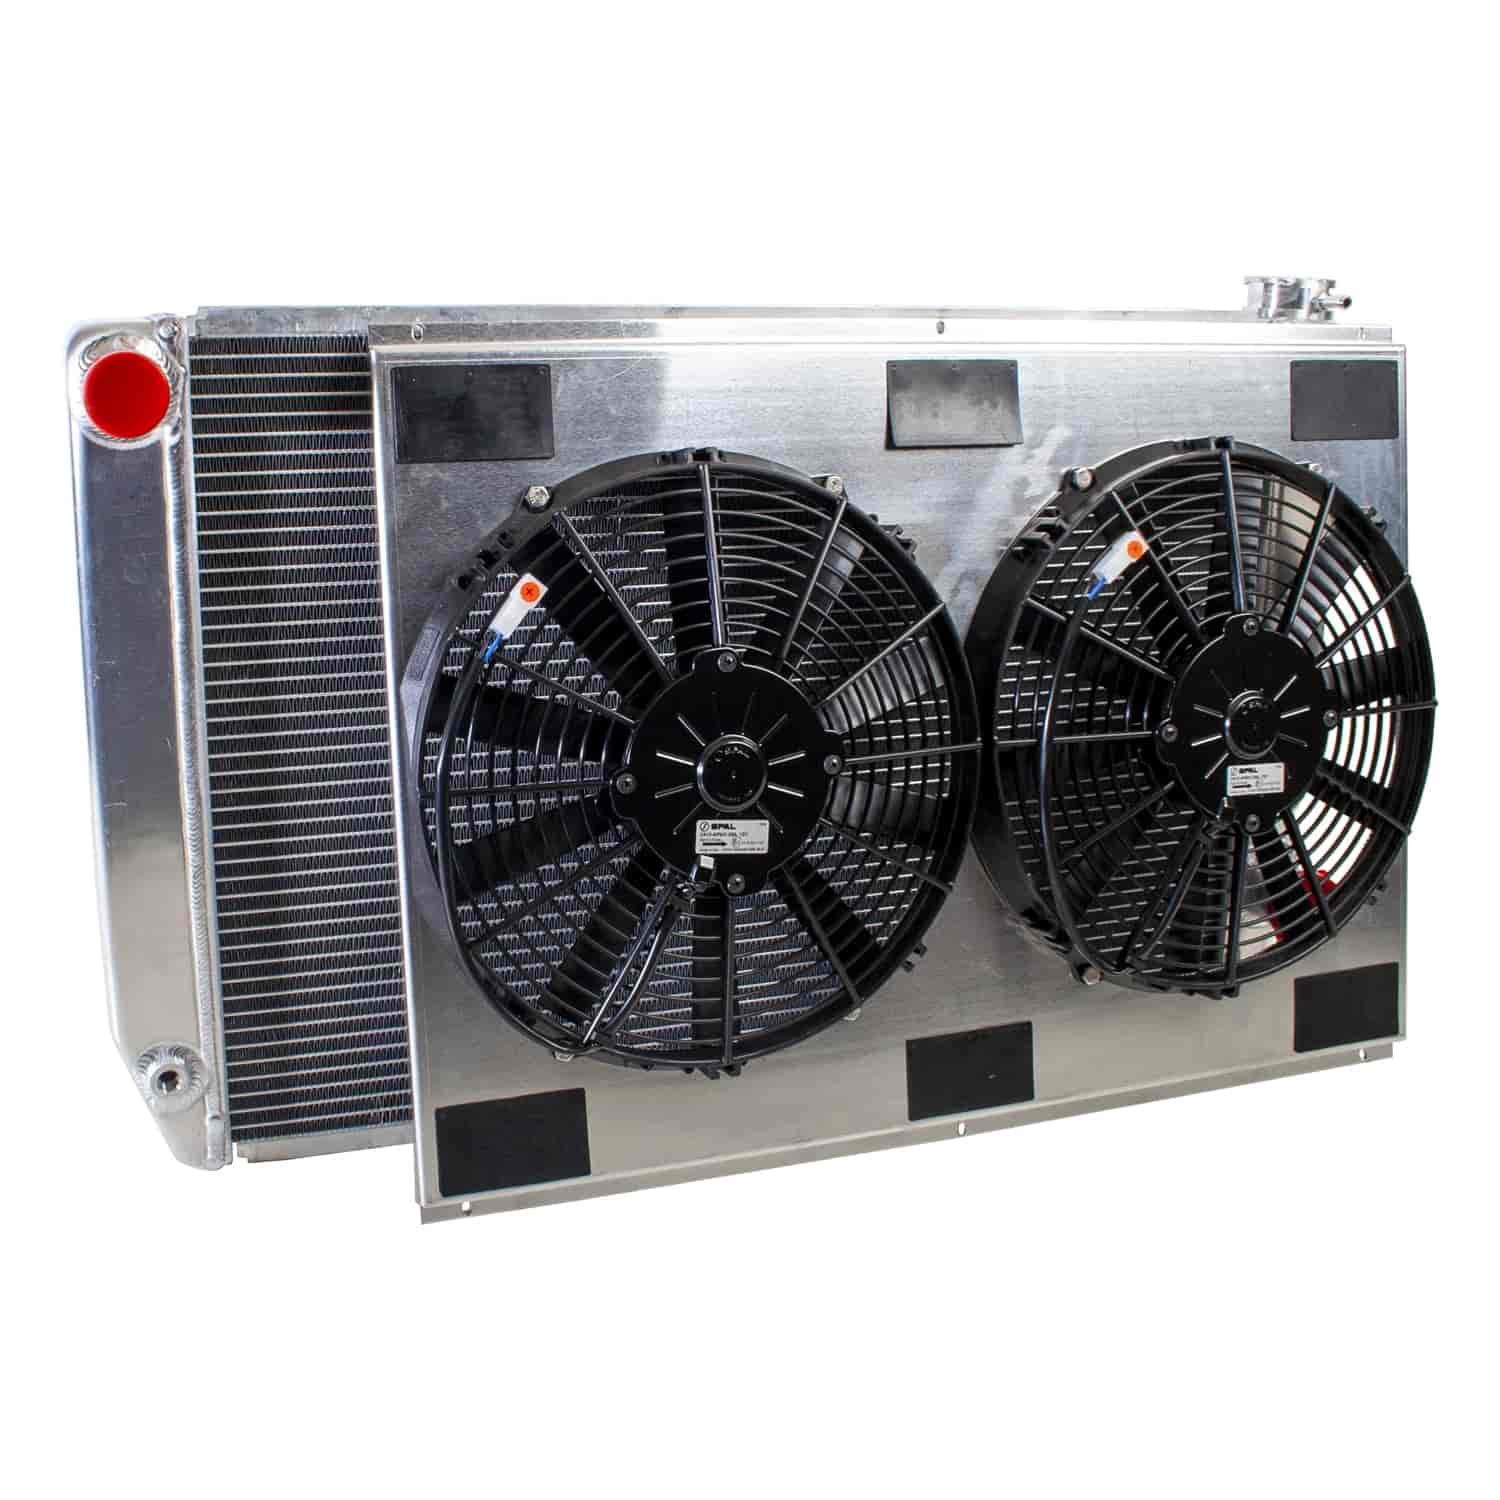 ClassicCool ComboUnit Universal Fit Radiator and Fan Single Pass Crossflow Design 31" x 19" with No Options